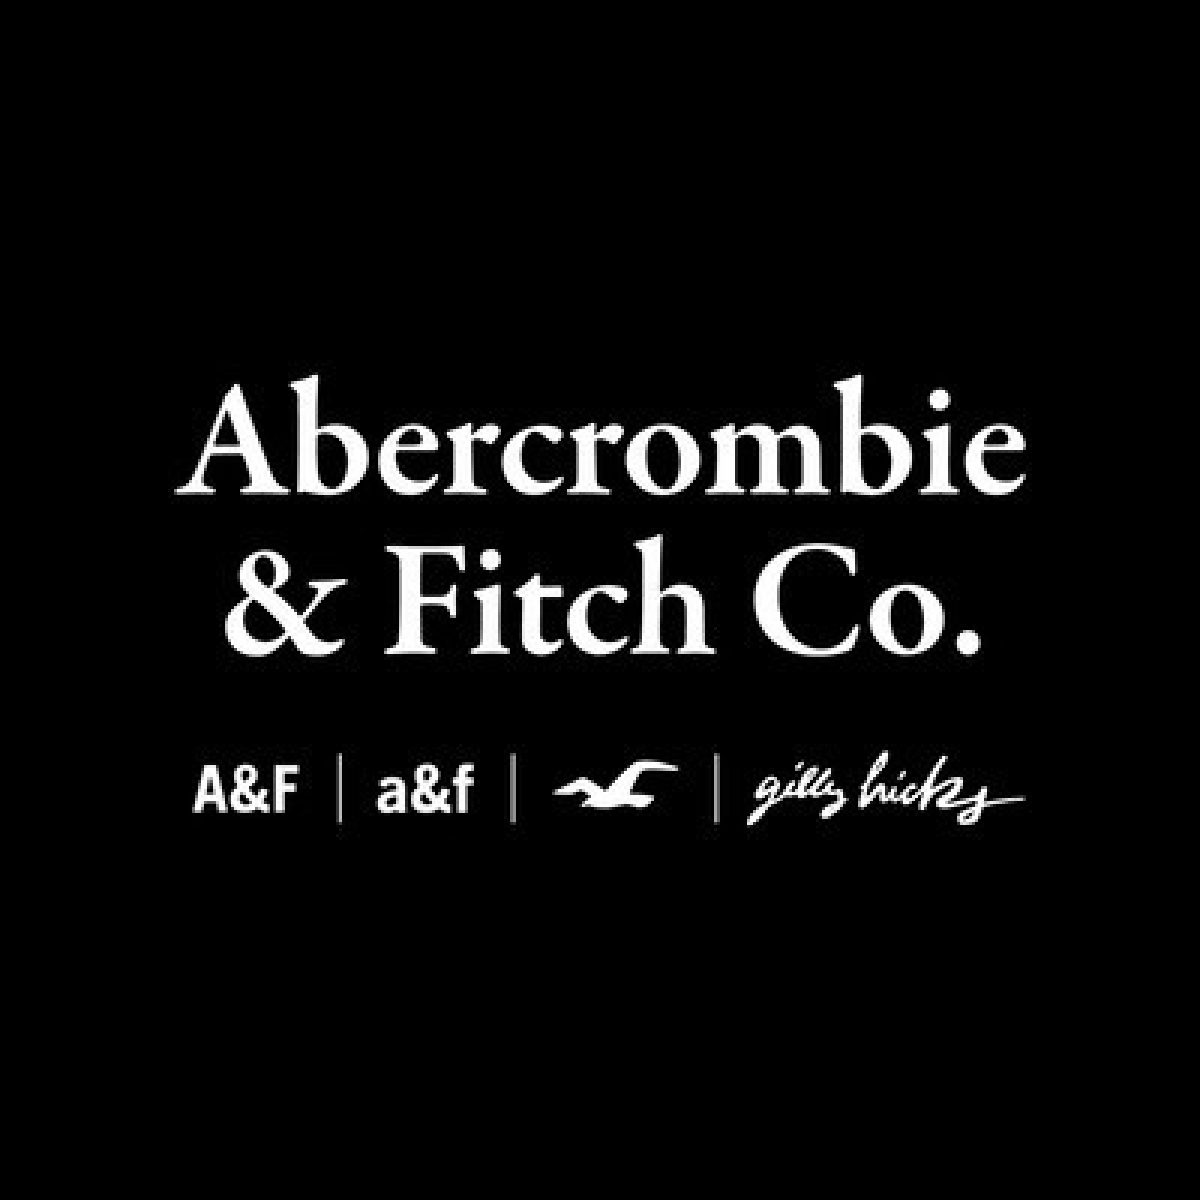 abercrombie fitch subsidiaries